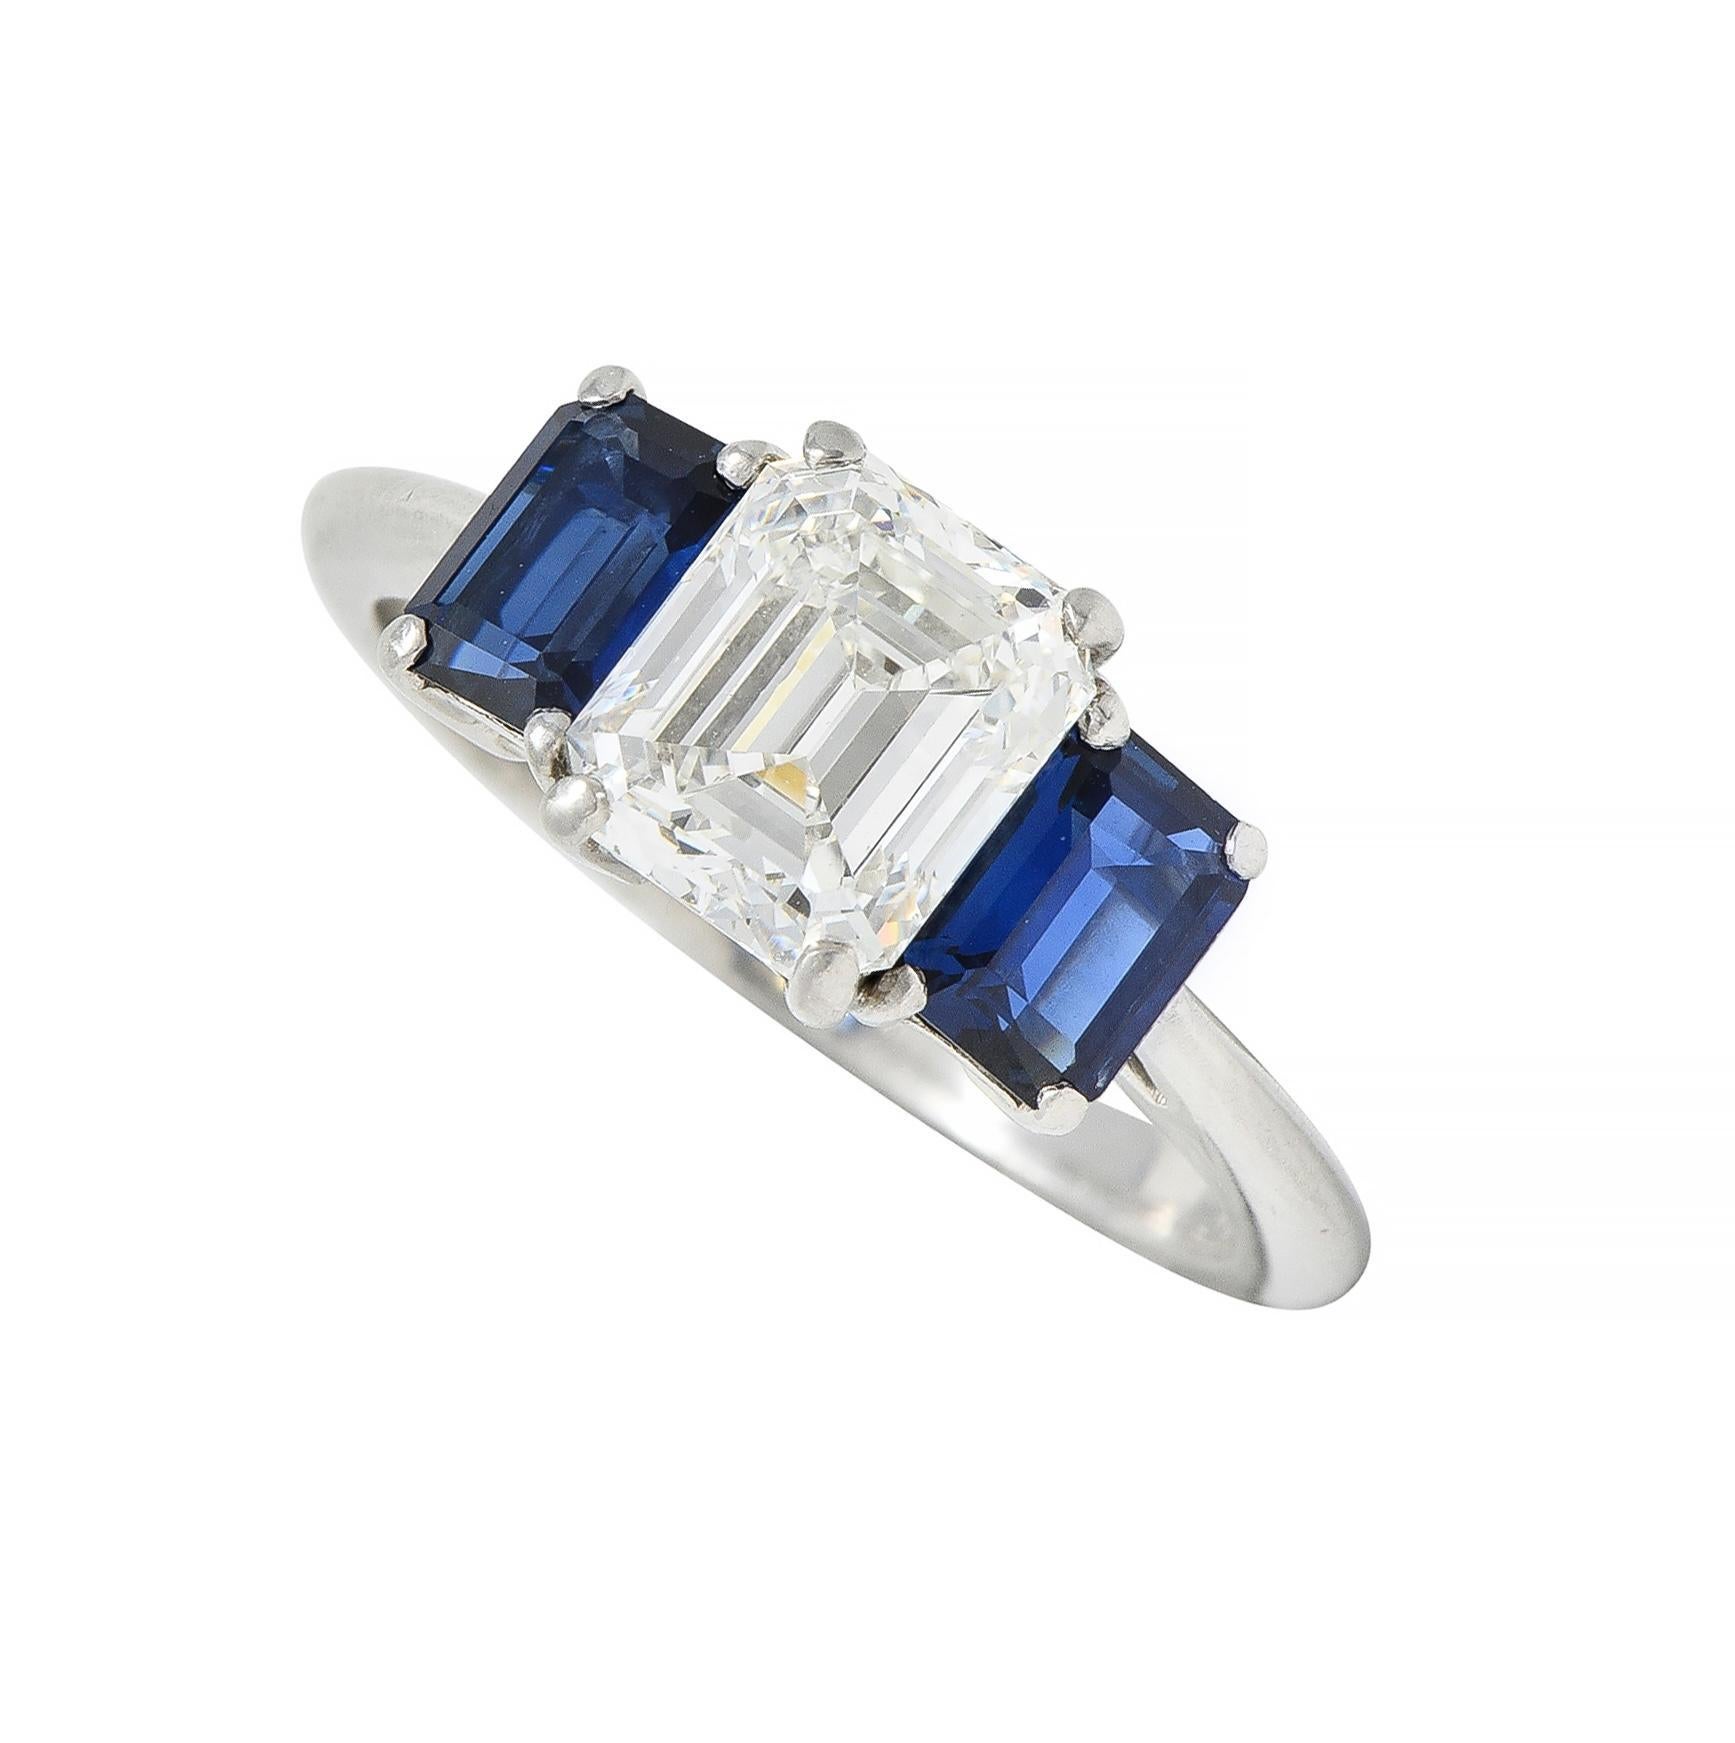 Centering an emerald cut diamond weighing 1.59 carats - G color with VS2 clarity
Prong set in basket and flanked by emerald cut sapphires
Weighing approximately 1.12 carats total - prong set
Transparent medium blue in color 
Flanked by cathedral